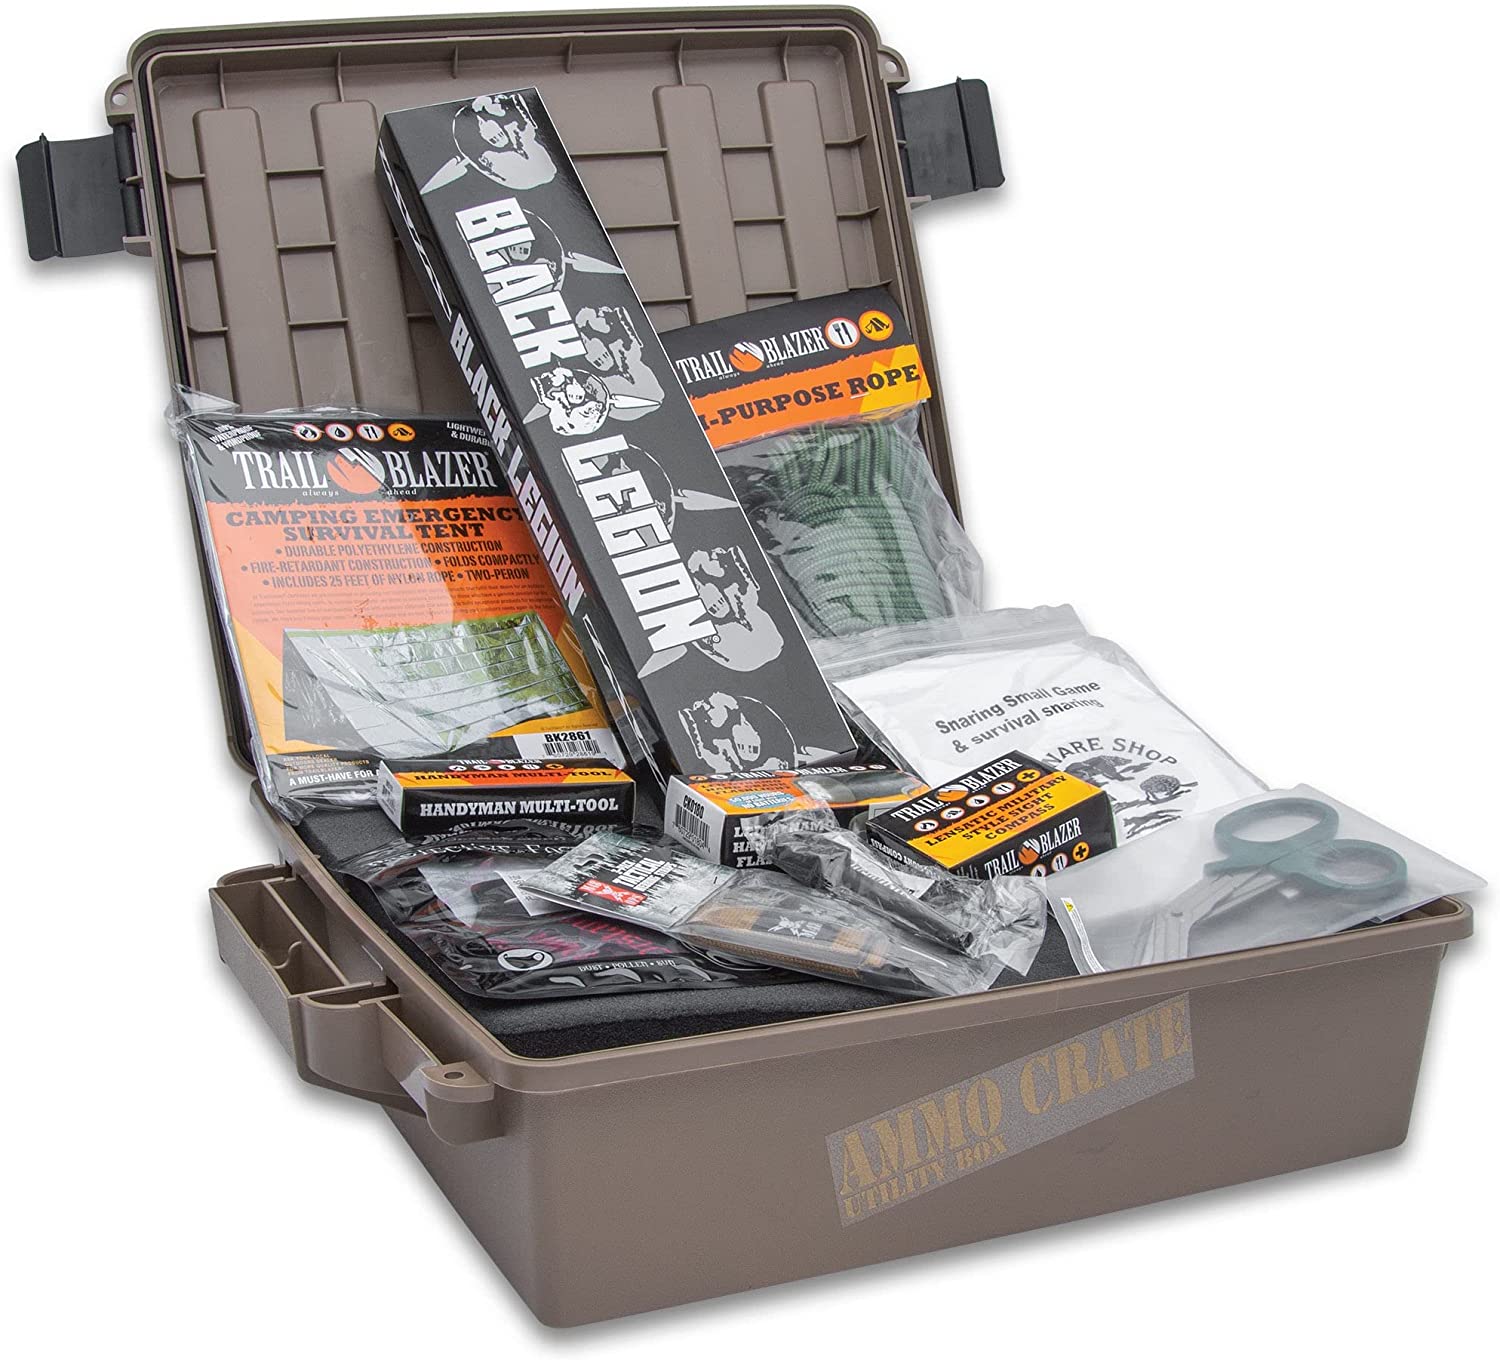 Doomsday Mystery Crate – Rugged Ammo Crate Packed with Assortment of Survival, Emergency, Outdoors, Bug-Out and Other Gear